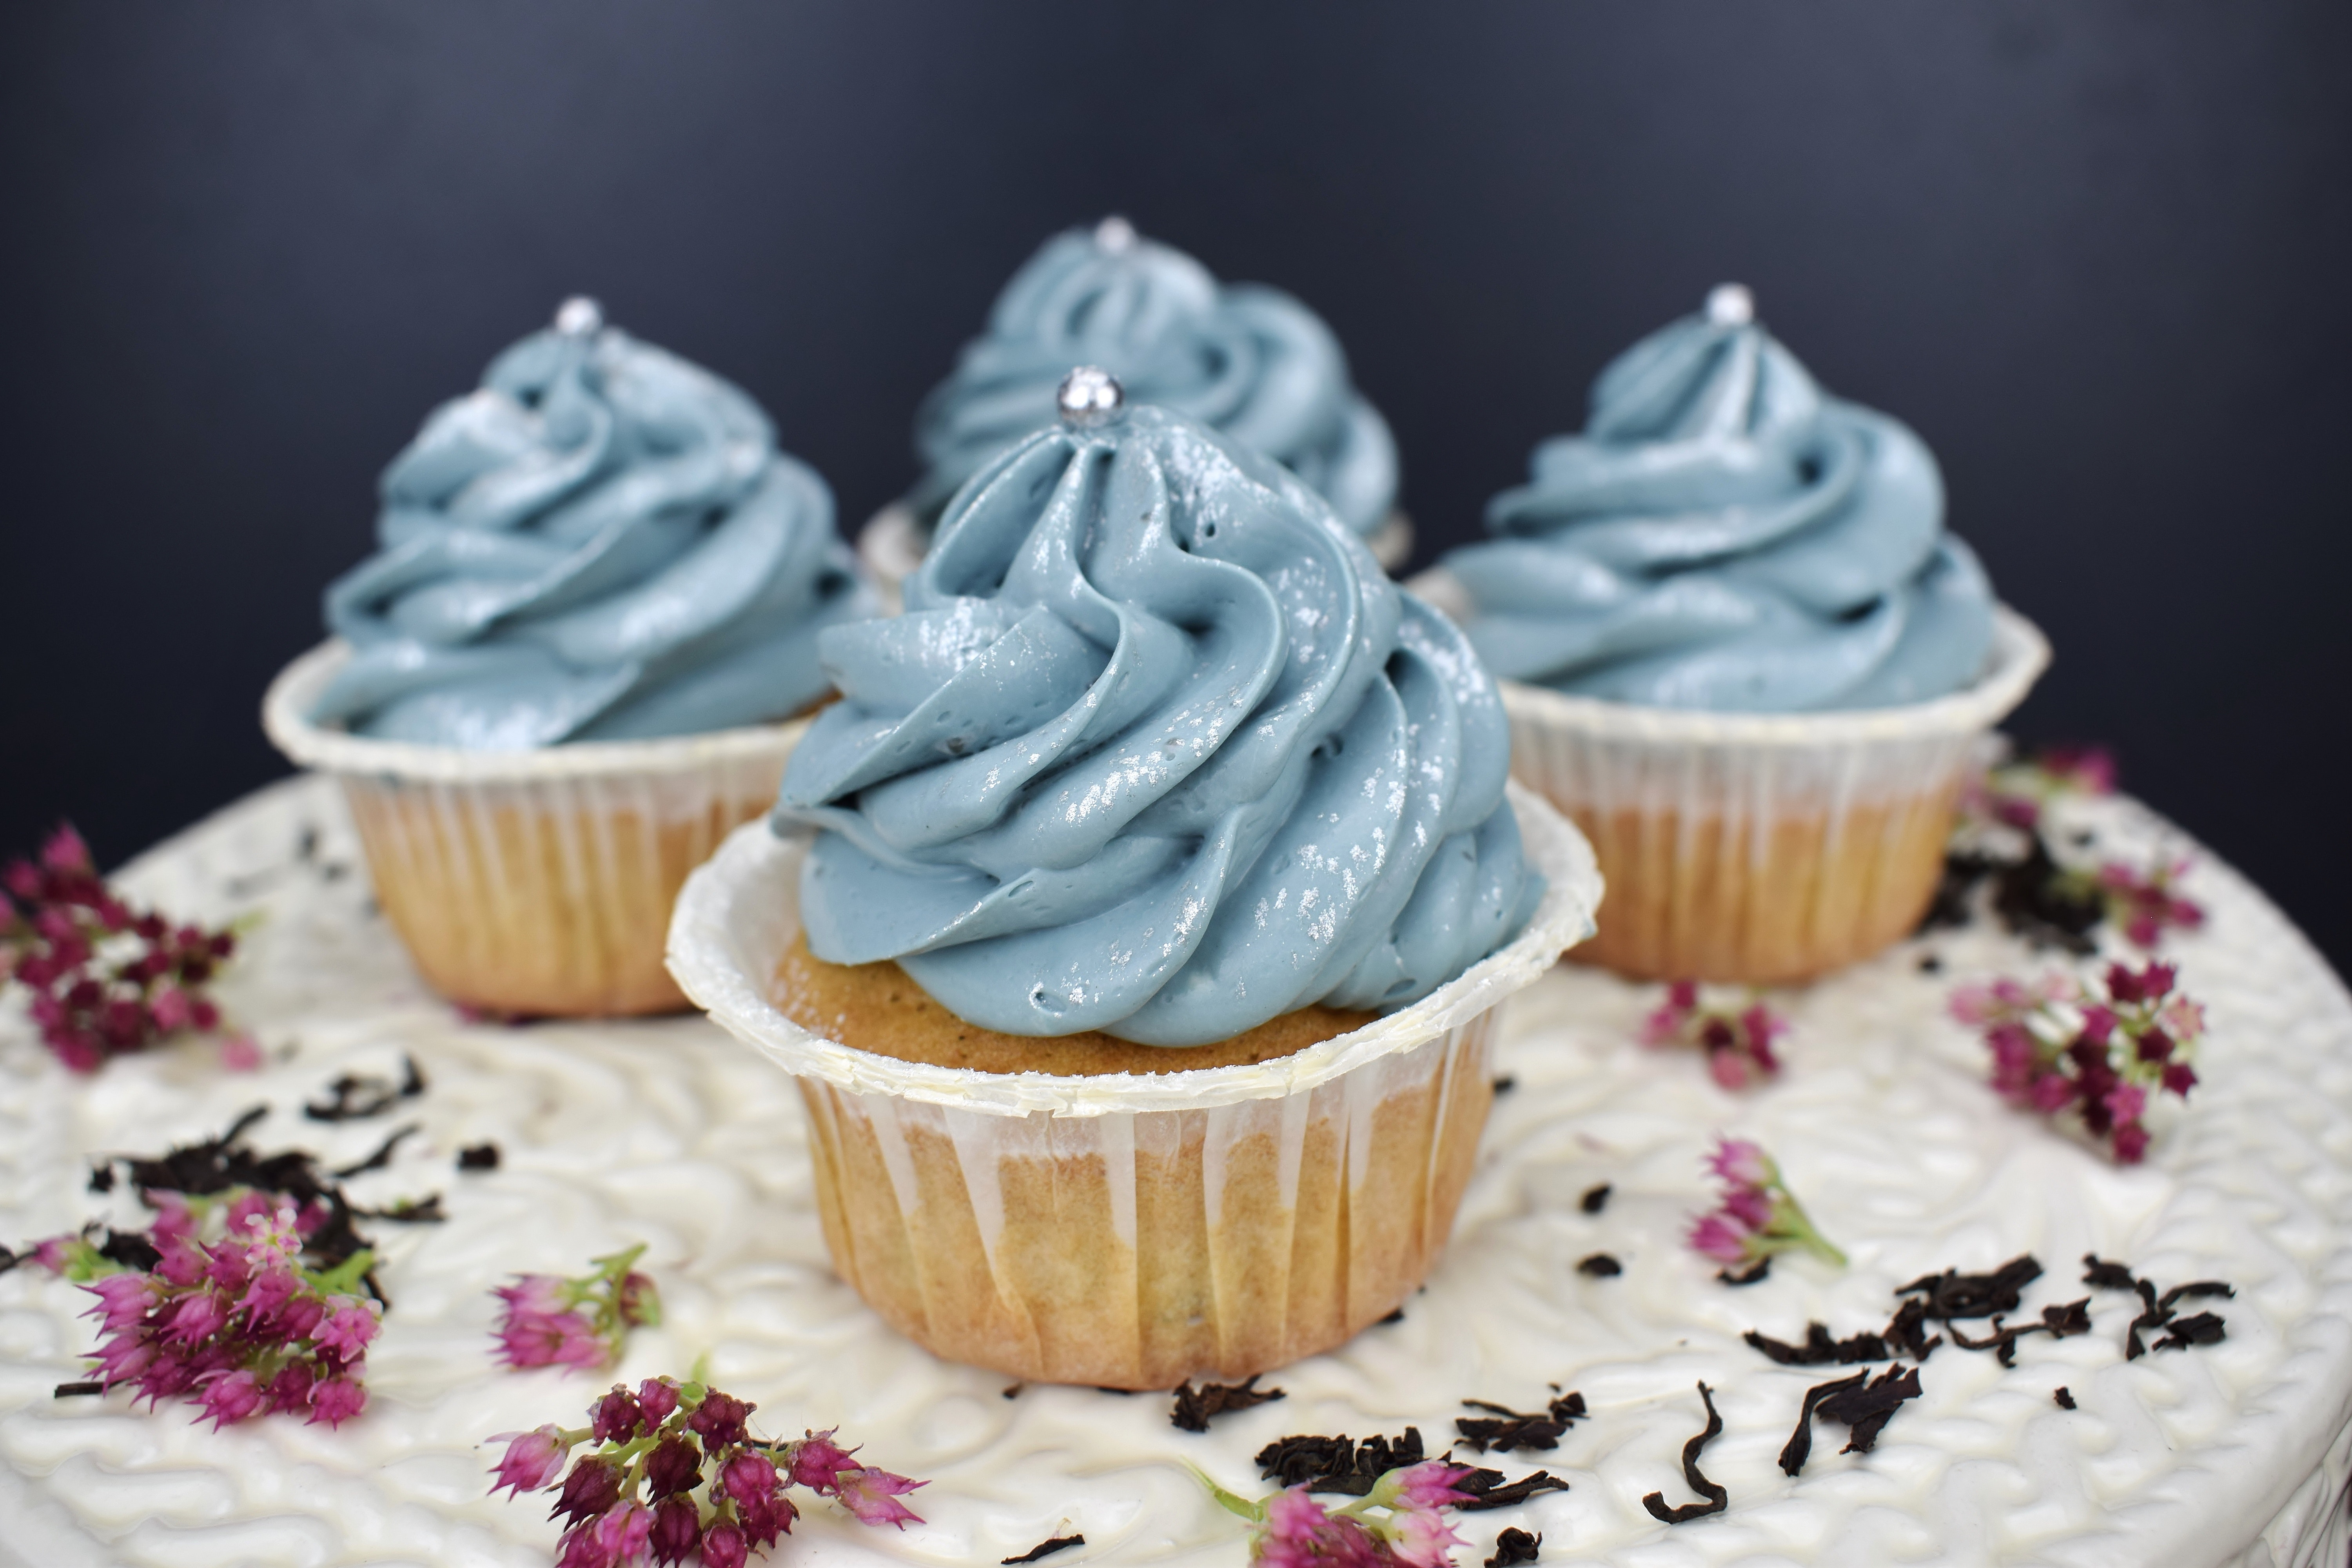 Cupcakes in blue color